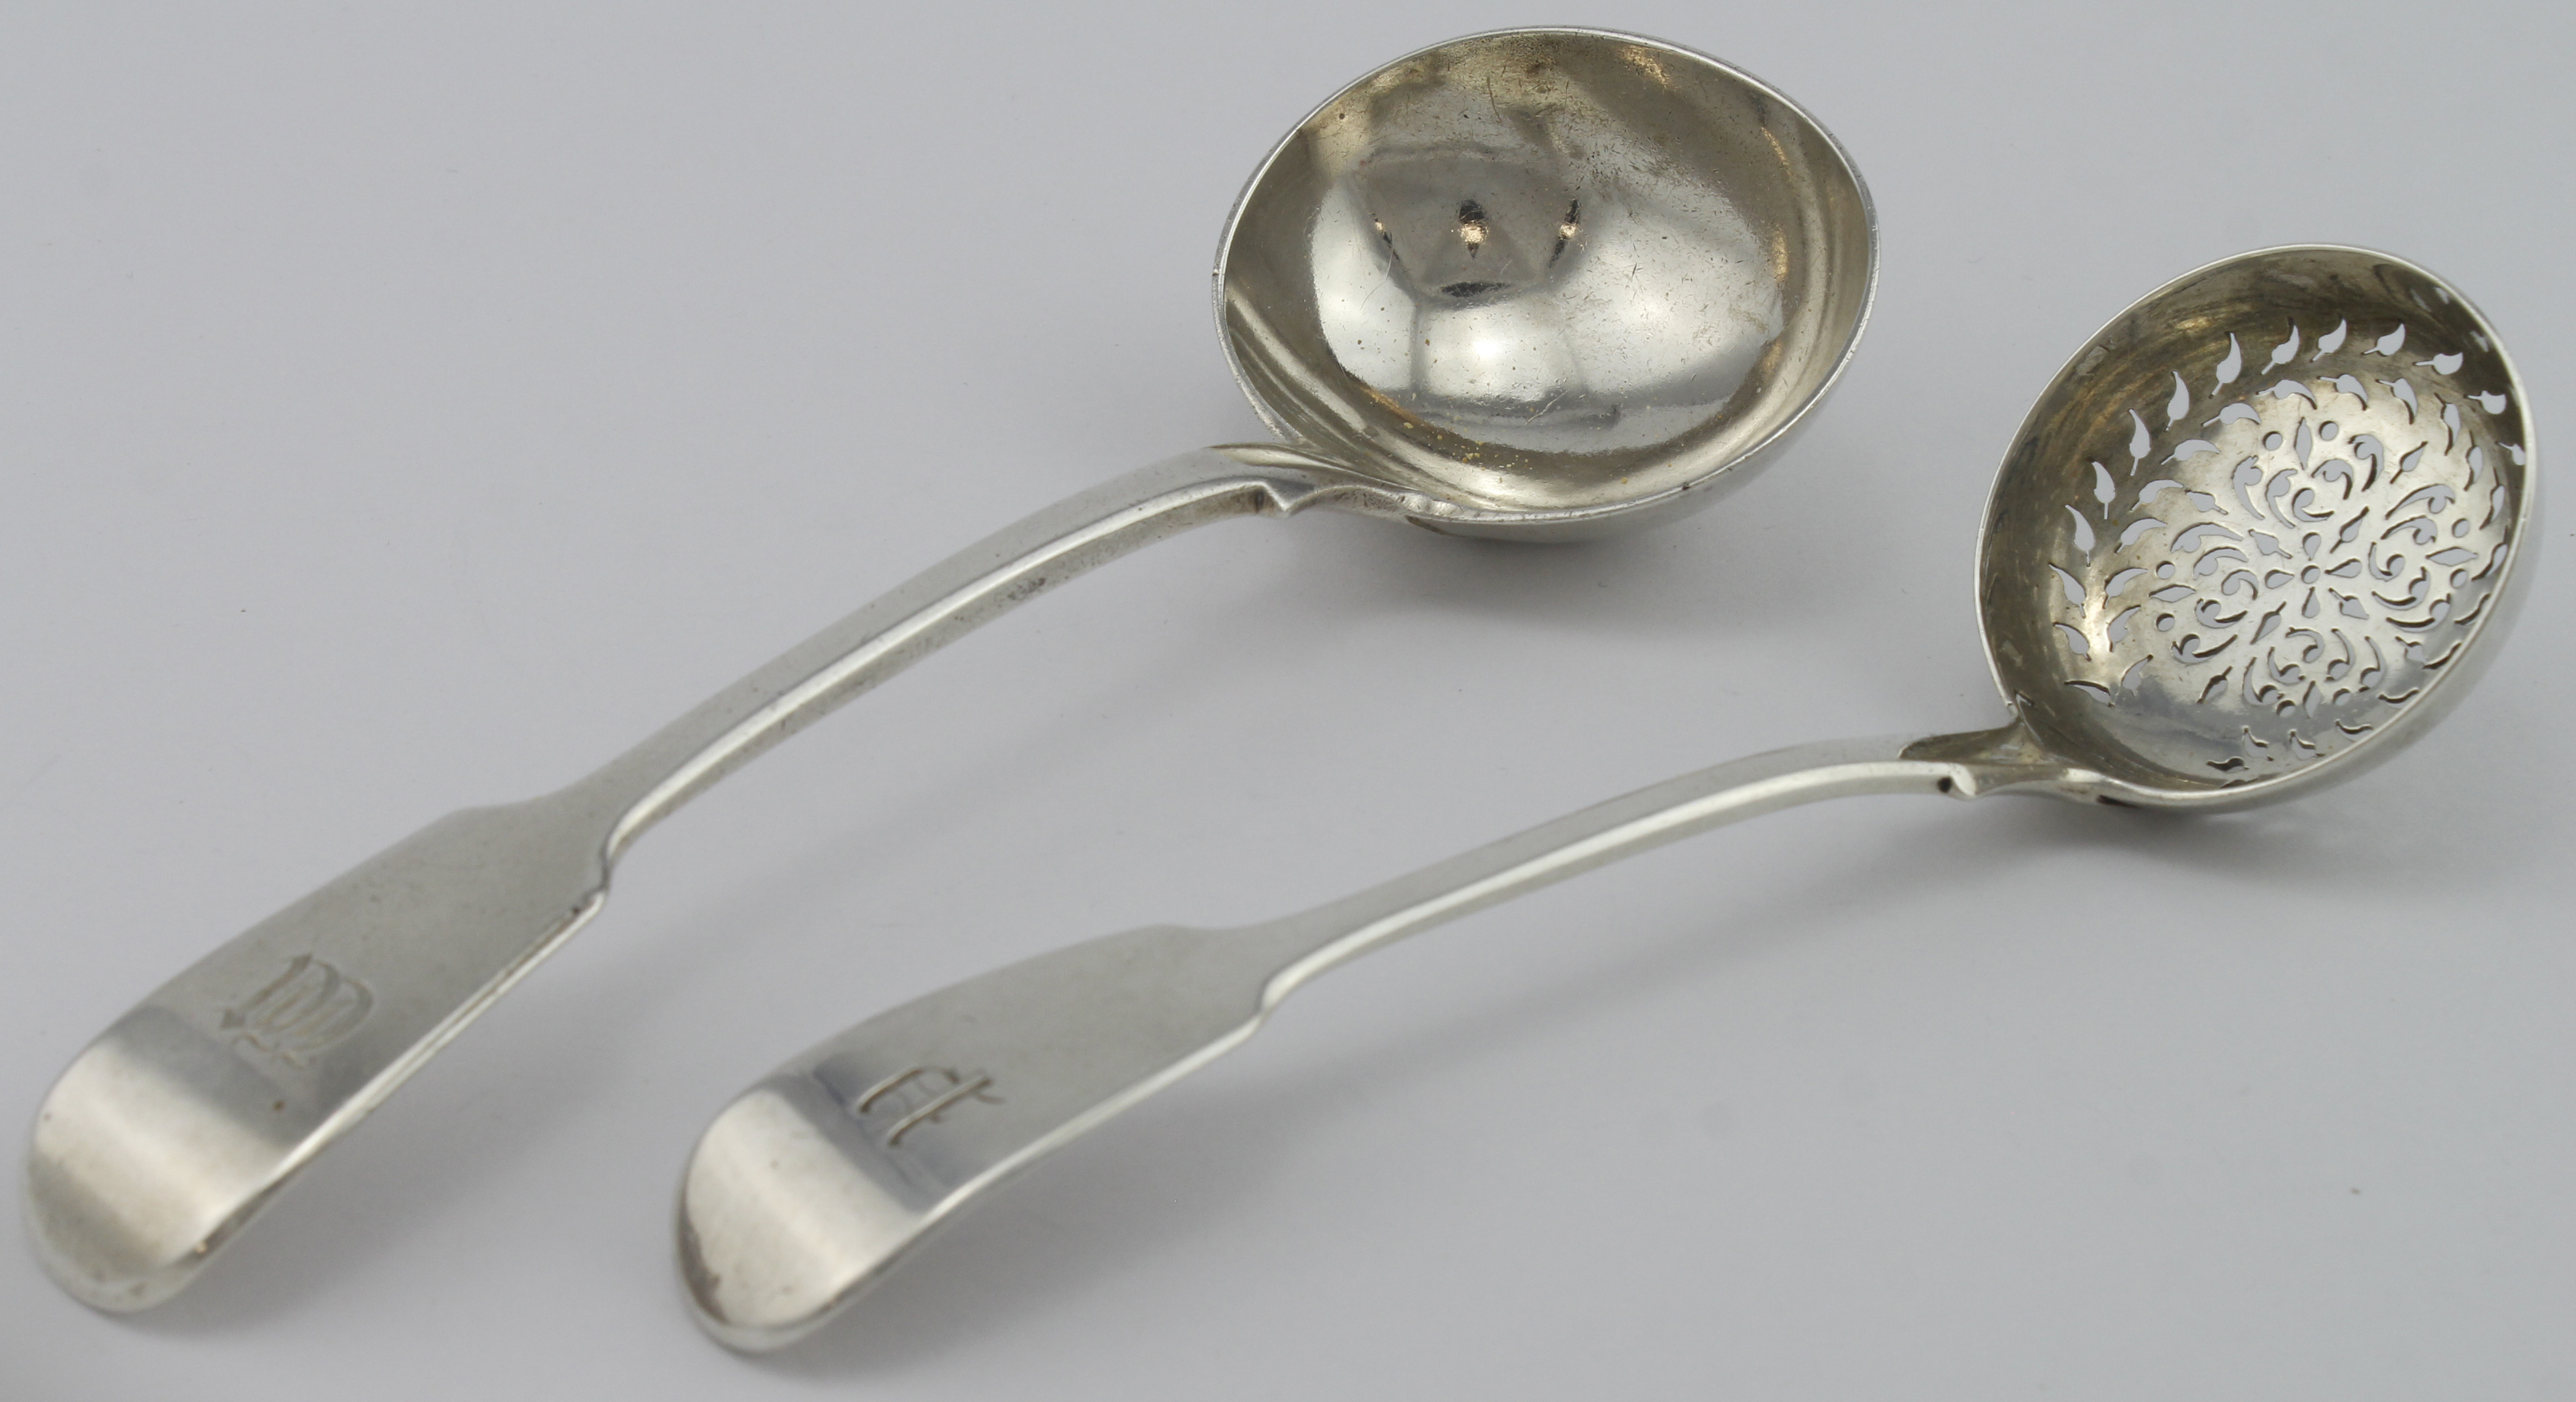 Two Victorian silver fiddle pattern ladles, one is a sugar sifter ladle and one is a sauce ladle,